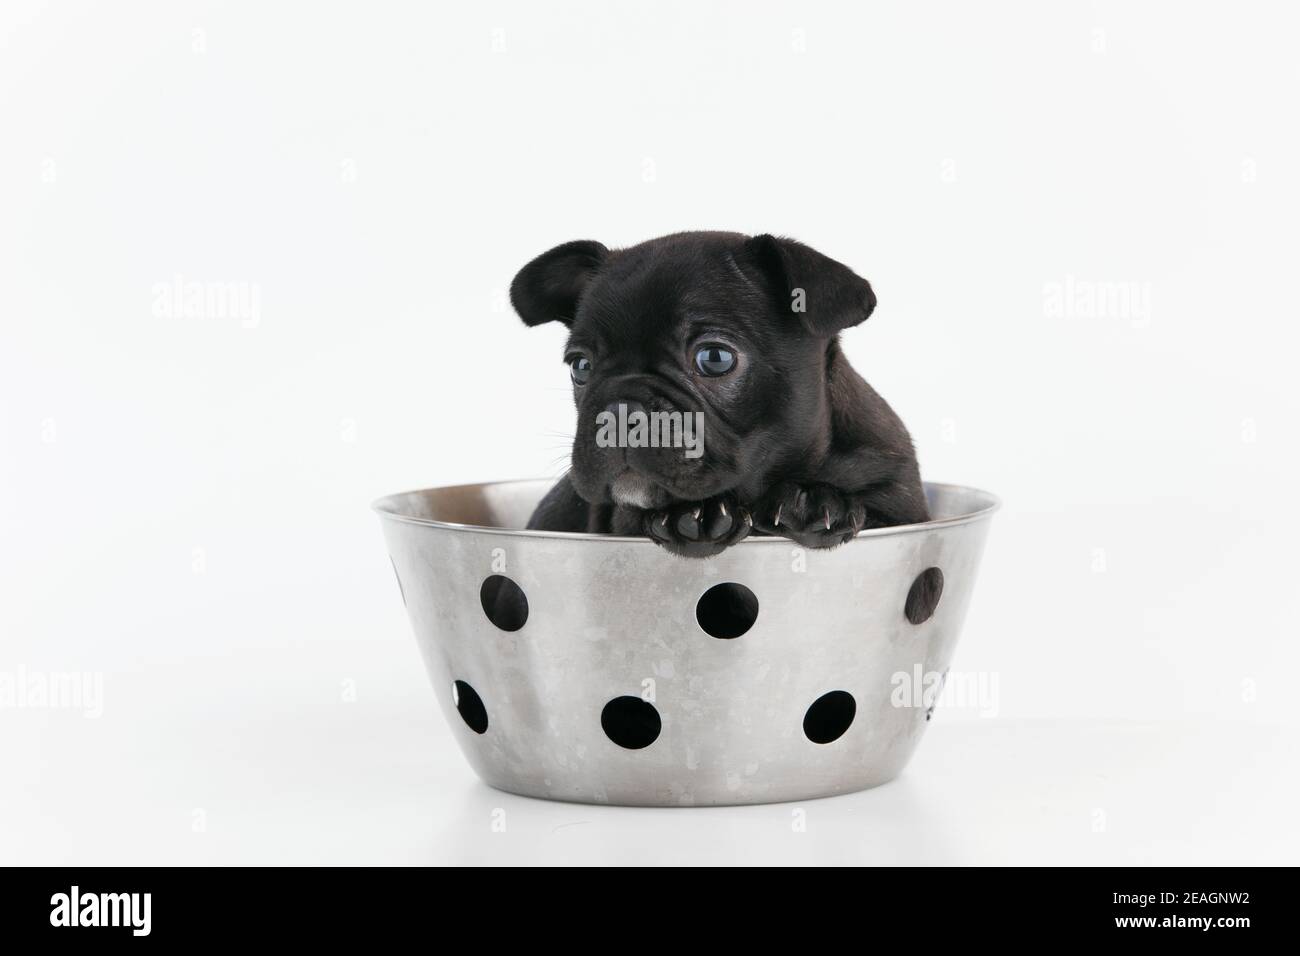 Closeup shot of a cute Boston Terrier puppy in a metal bowl with holes Stock Photo